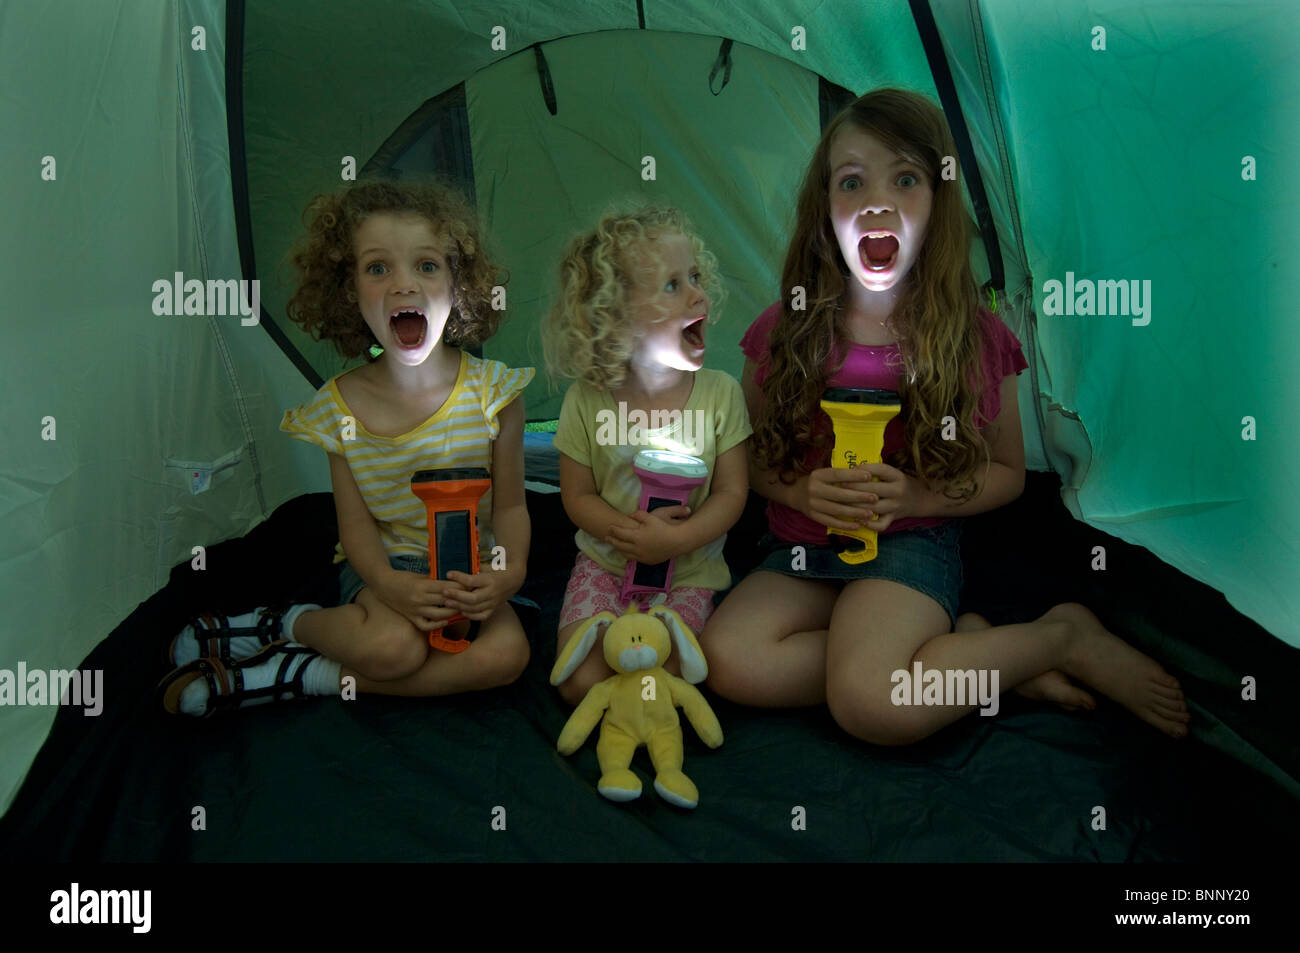 Three little girls in a tent giving themselves spooky faces with solar powered Alamy torches. Stock Photo